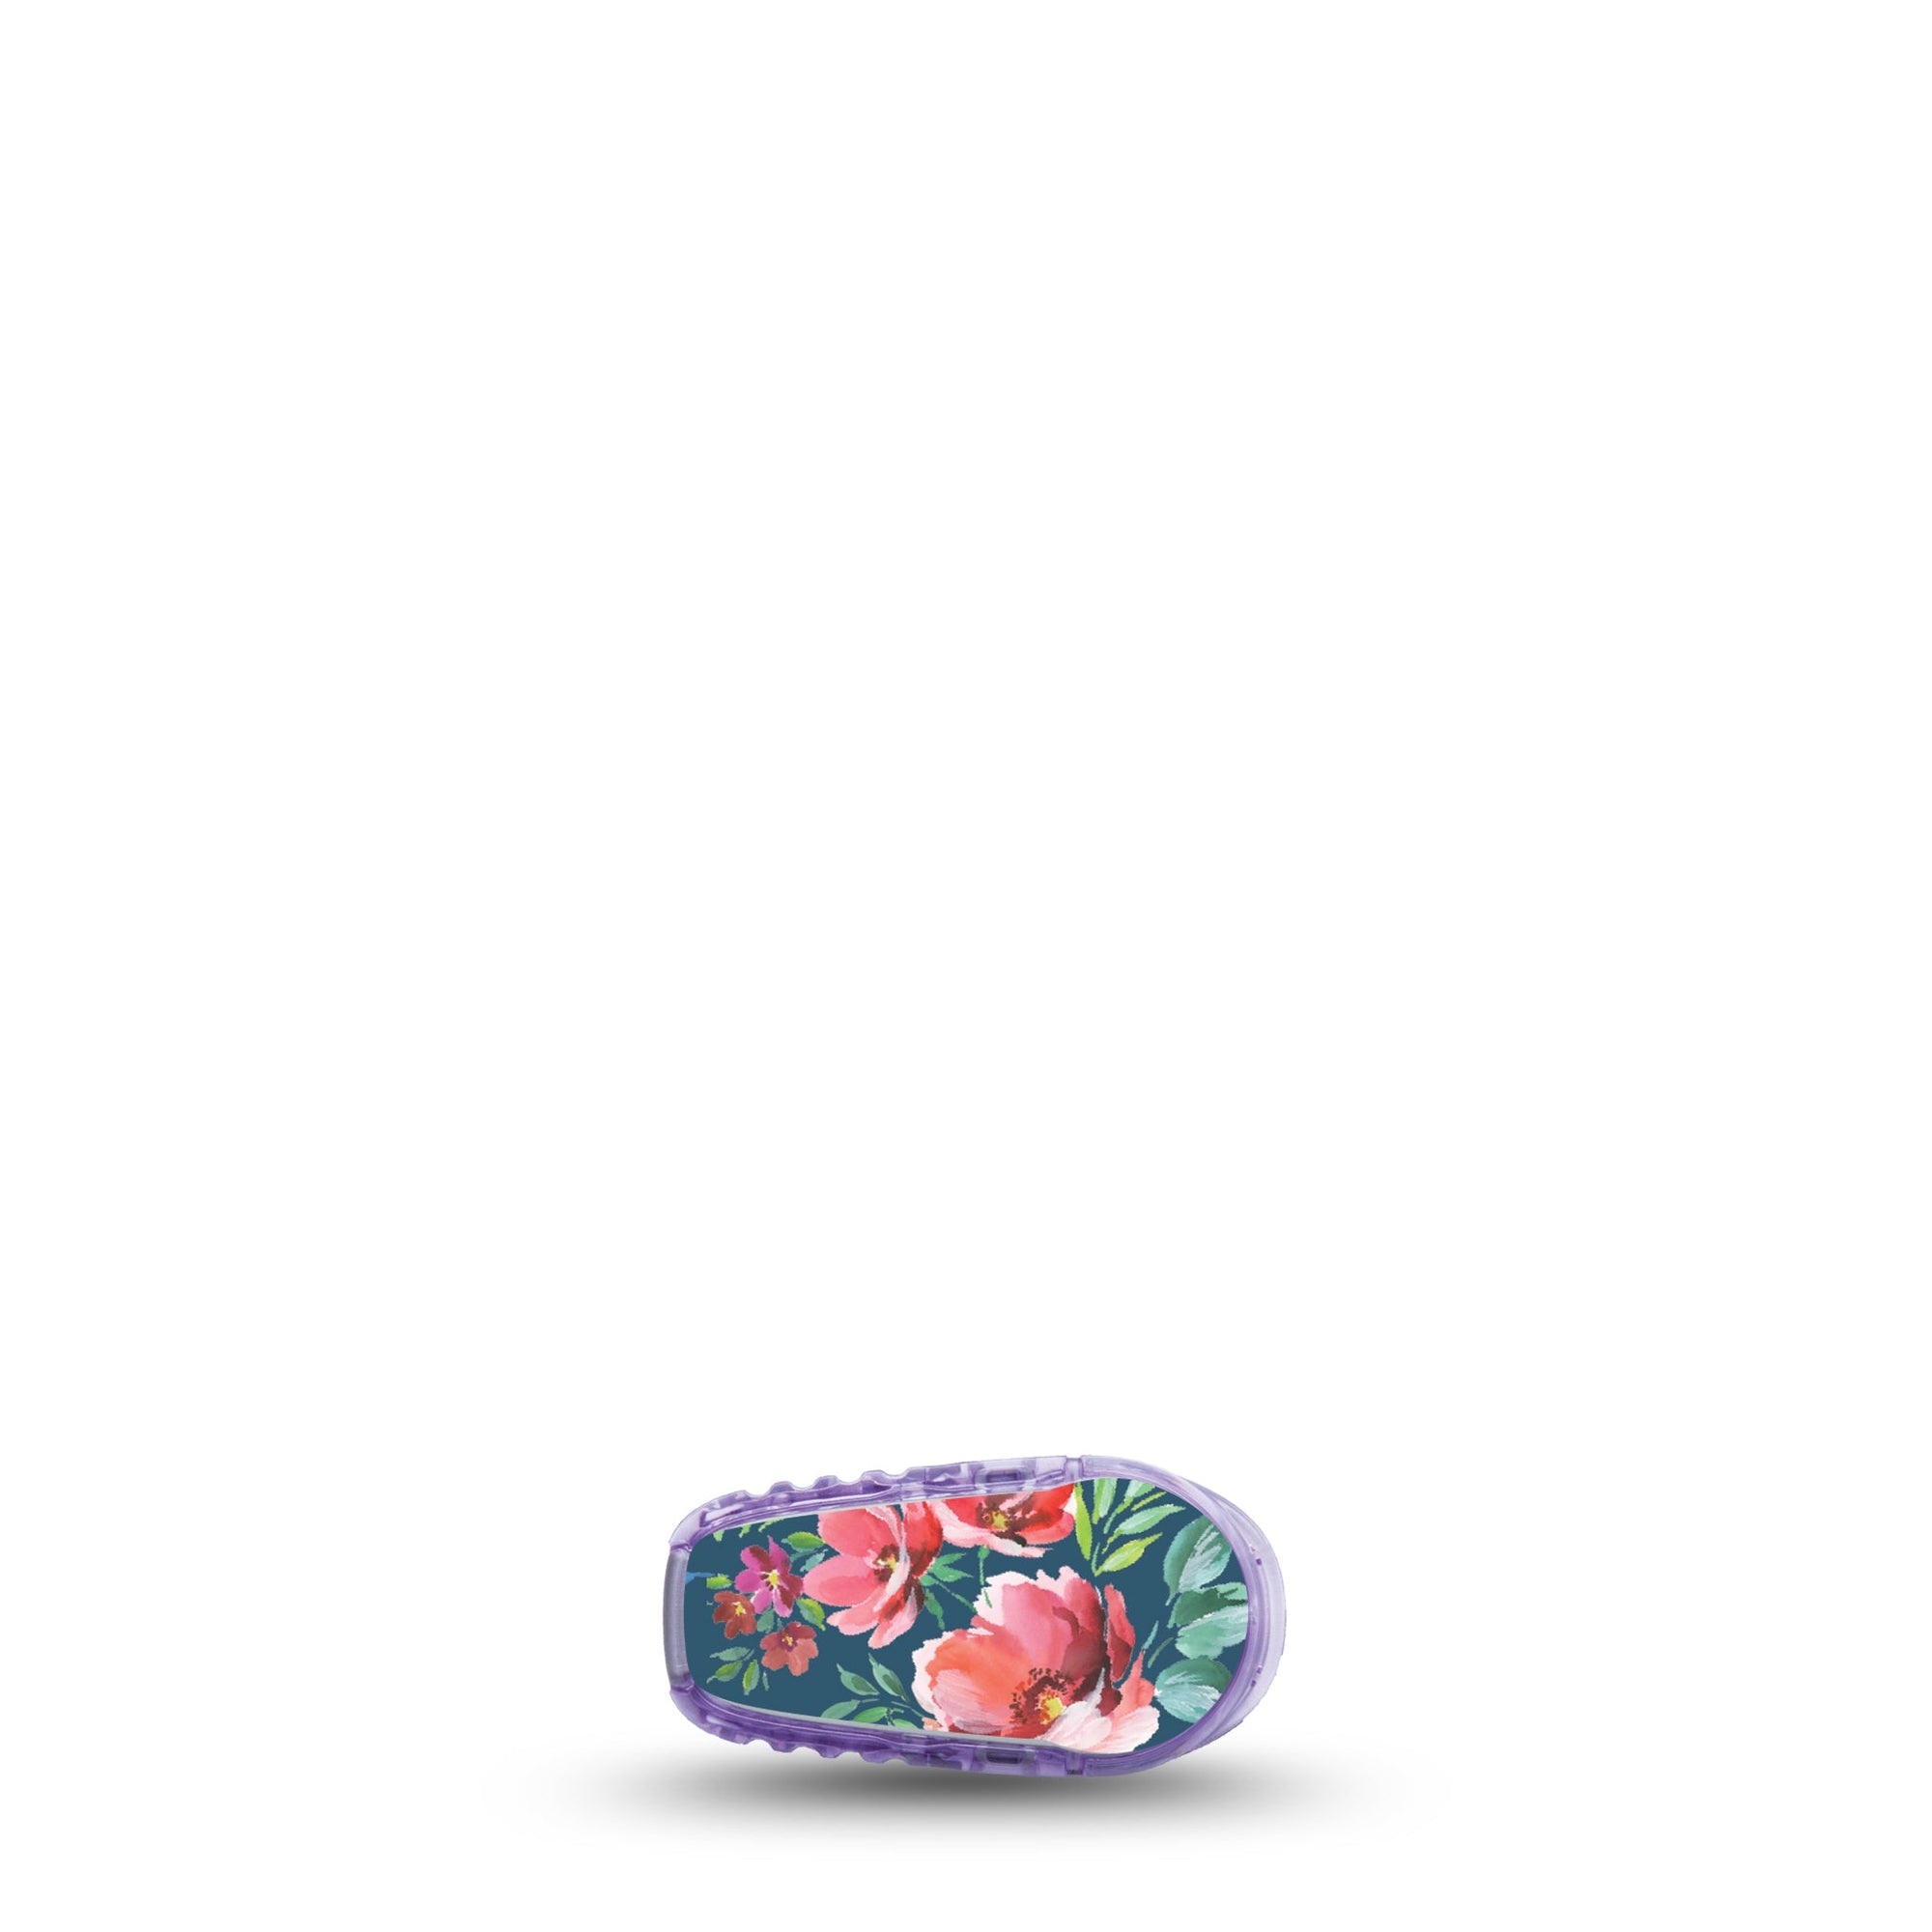 ExpressionMed Floral Enchantment Dexcom G6 Transmitter Sticker, Single Sticker Only, Bloom Charm, CGM Adhesive Sticker Design